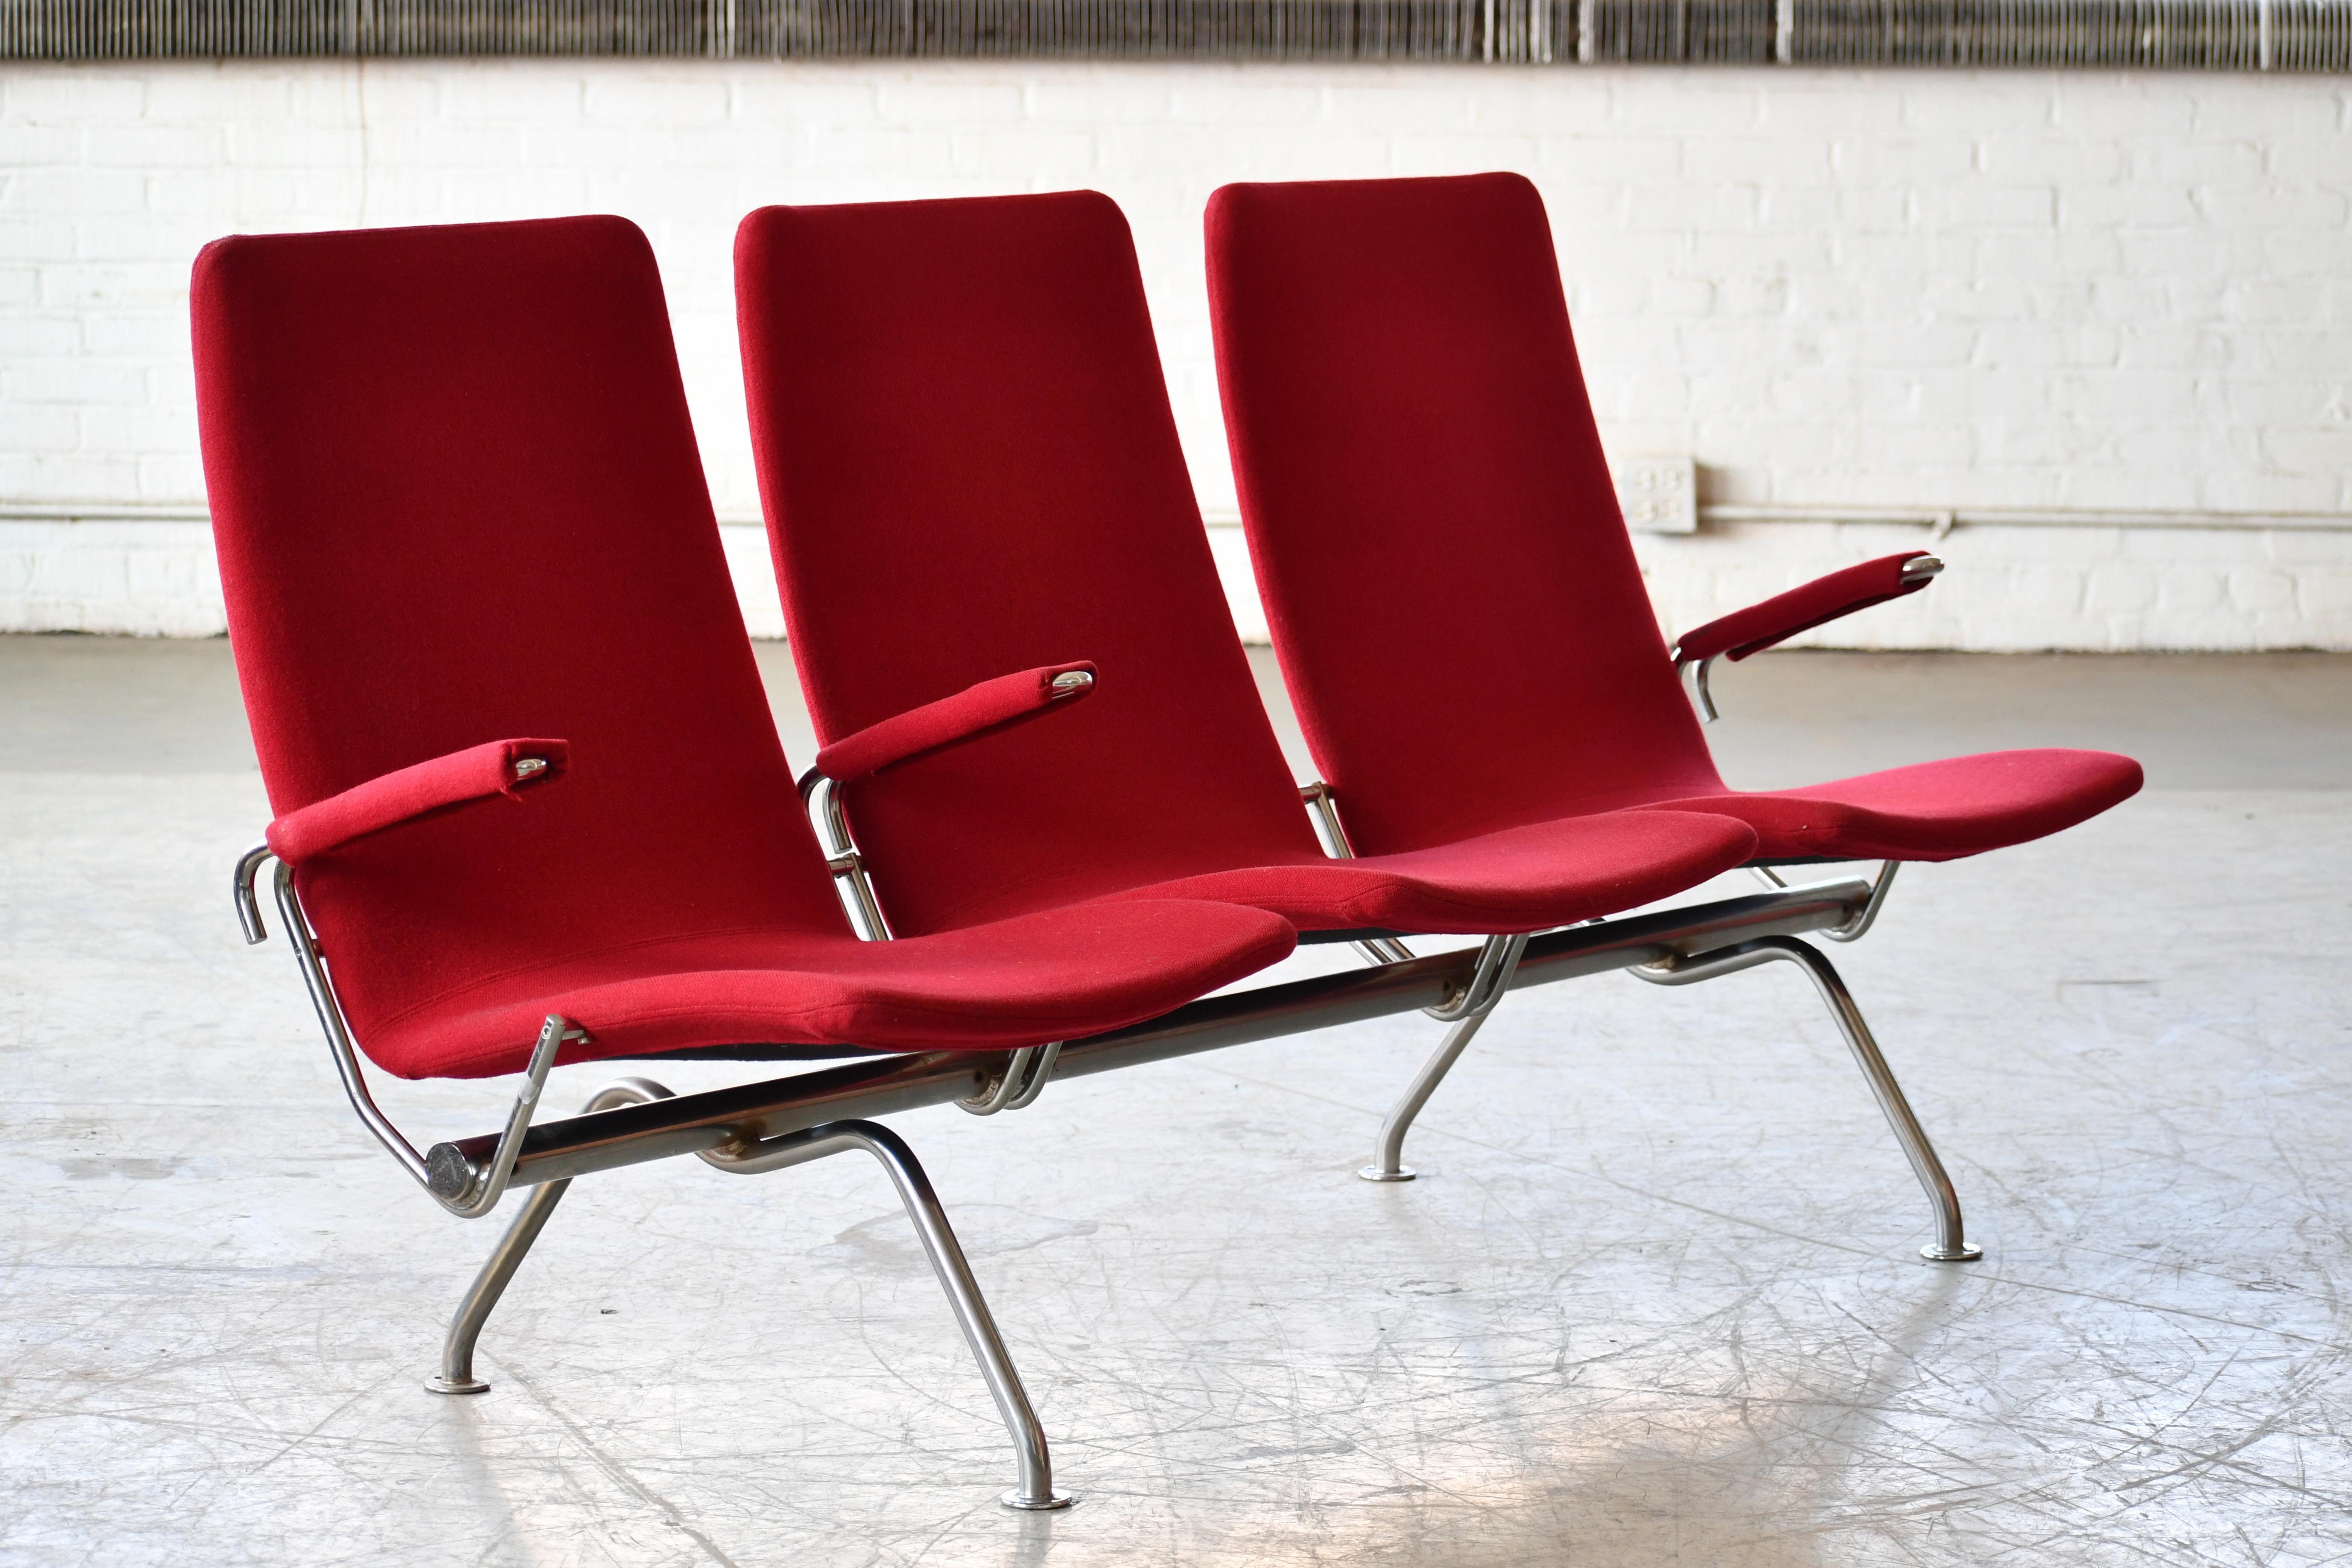 This very cool airport sofa was part of the actual decor in Copenhagen Airport in Denmark until they remodeled a few years back. The furniture was designed by Architect/Designer, Jens Ammundsen and produced by Fritz Hansen in 1991 in wool and